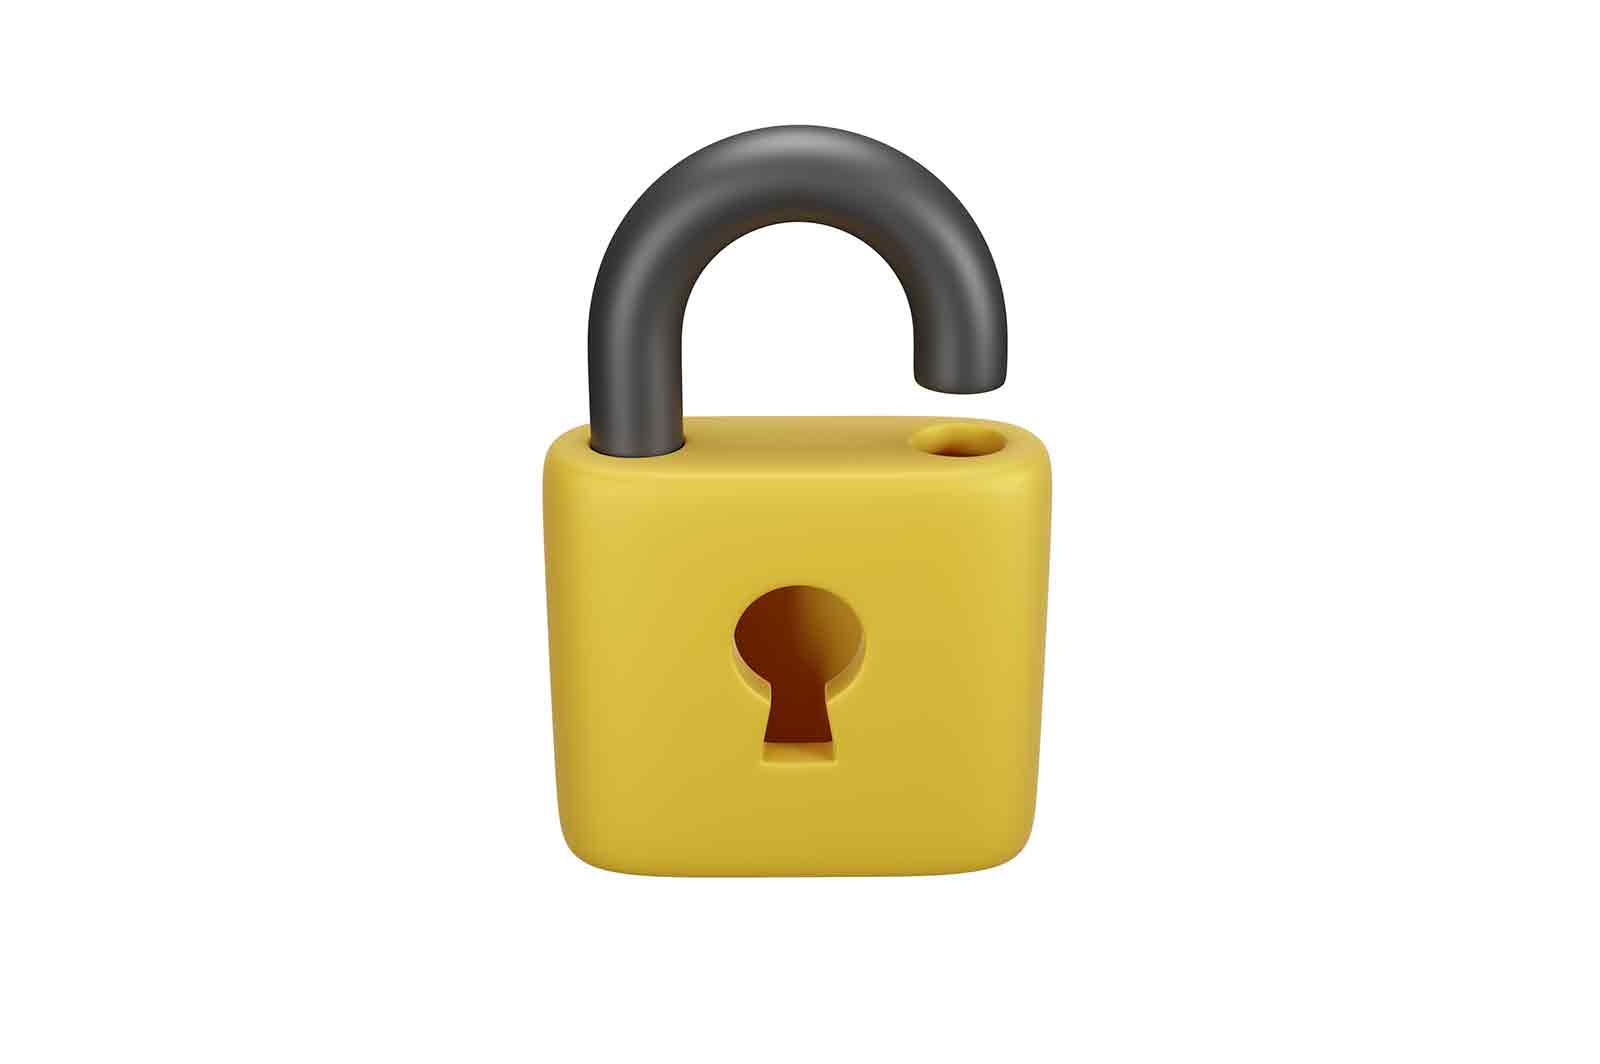 Open padlock icon, unblocked lock with steel shackle 3d rendered illustration. Theft and opening information and property. Breaking password and personal web account security 3d isometric